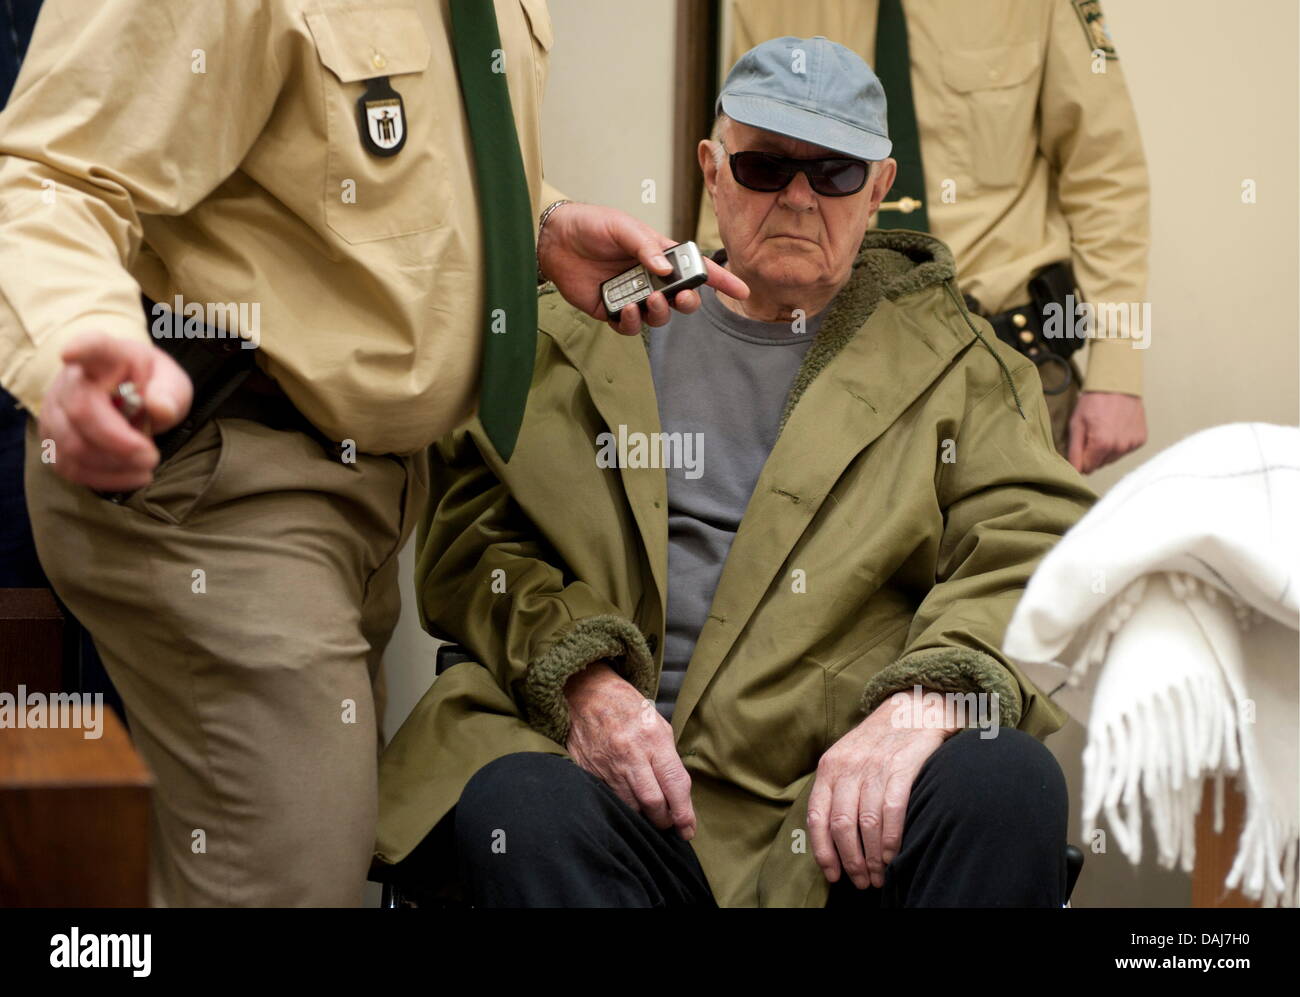 The picture shows John "Iwan" Demjanjuk at the continuation of the trial at the district court in Munich, Germany on 23 March 2011. The former overseer of the NS extermination camp in Sobibor   John Demjanjuk is being charged with assecory to murder. Lawyers of the joint plaintiffs are in agreement that Demjanjuk is responsible for the deaths of members of their clients' families.  Stock Photo